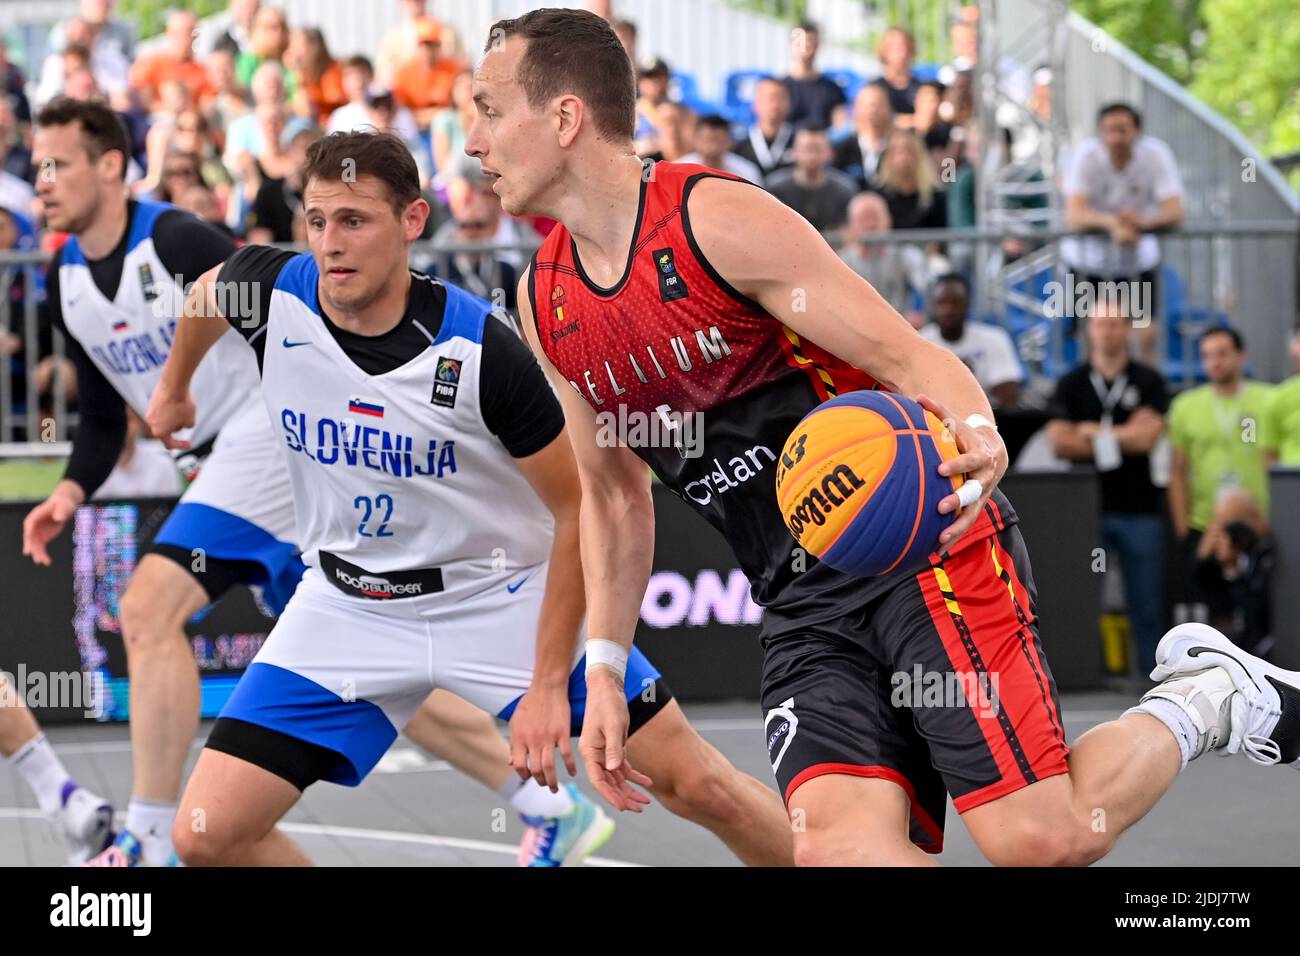 Antwerp. Belgium, 21 June 2022, Slovenia's Adrian Hirschmann and Belgium's Nick Celis pictured during a 3x3 basketball game between Belgium and Slovenia, in the first game (out of four) of the Men's Qualifier stage at the FIBA 2022 world cup, on Tuesday 21 June 2022, in Antwerp. The FIBA 3x3 Basket World Cup 2022 takes place from 21 to 26 June in Antwerp. BELGA PHOTO DIRK WAEM Stock Photo